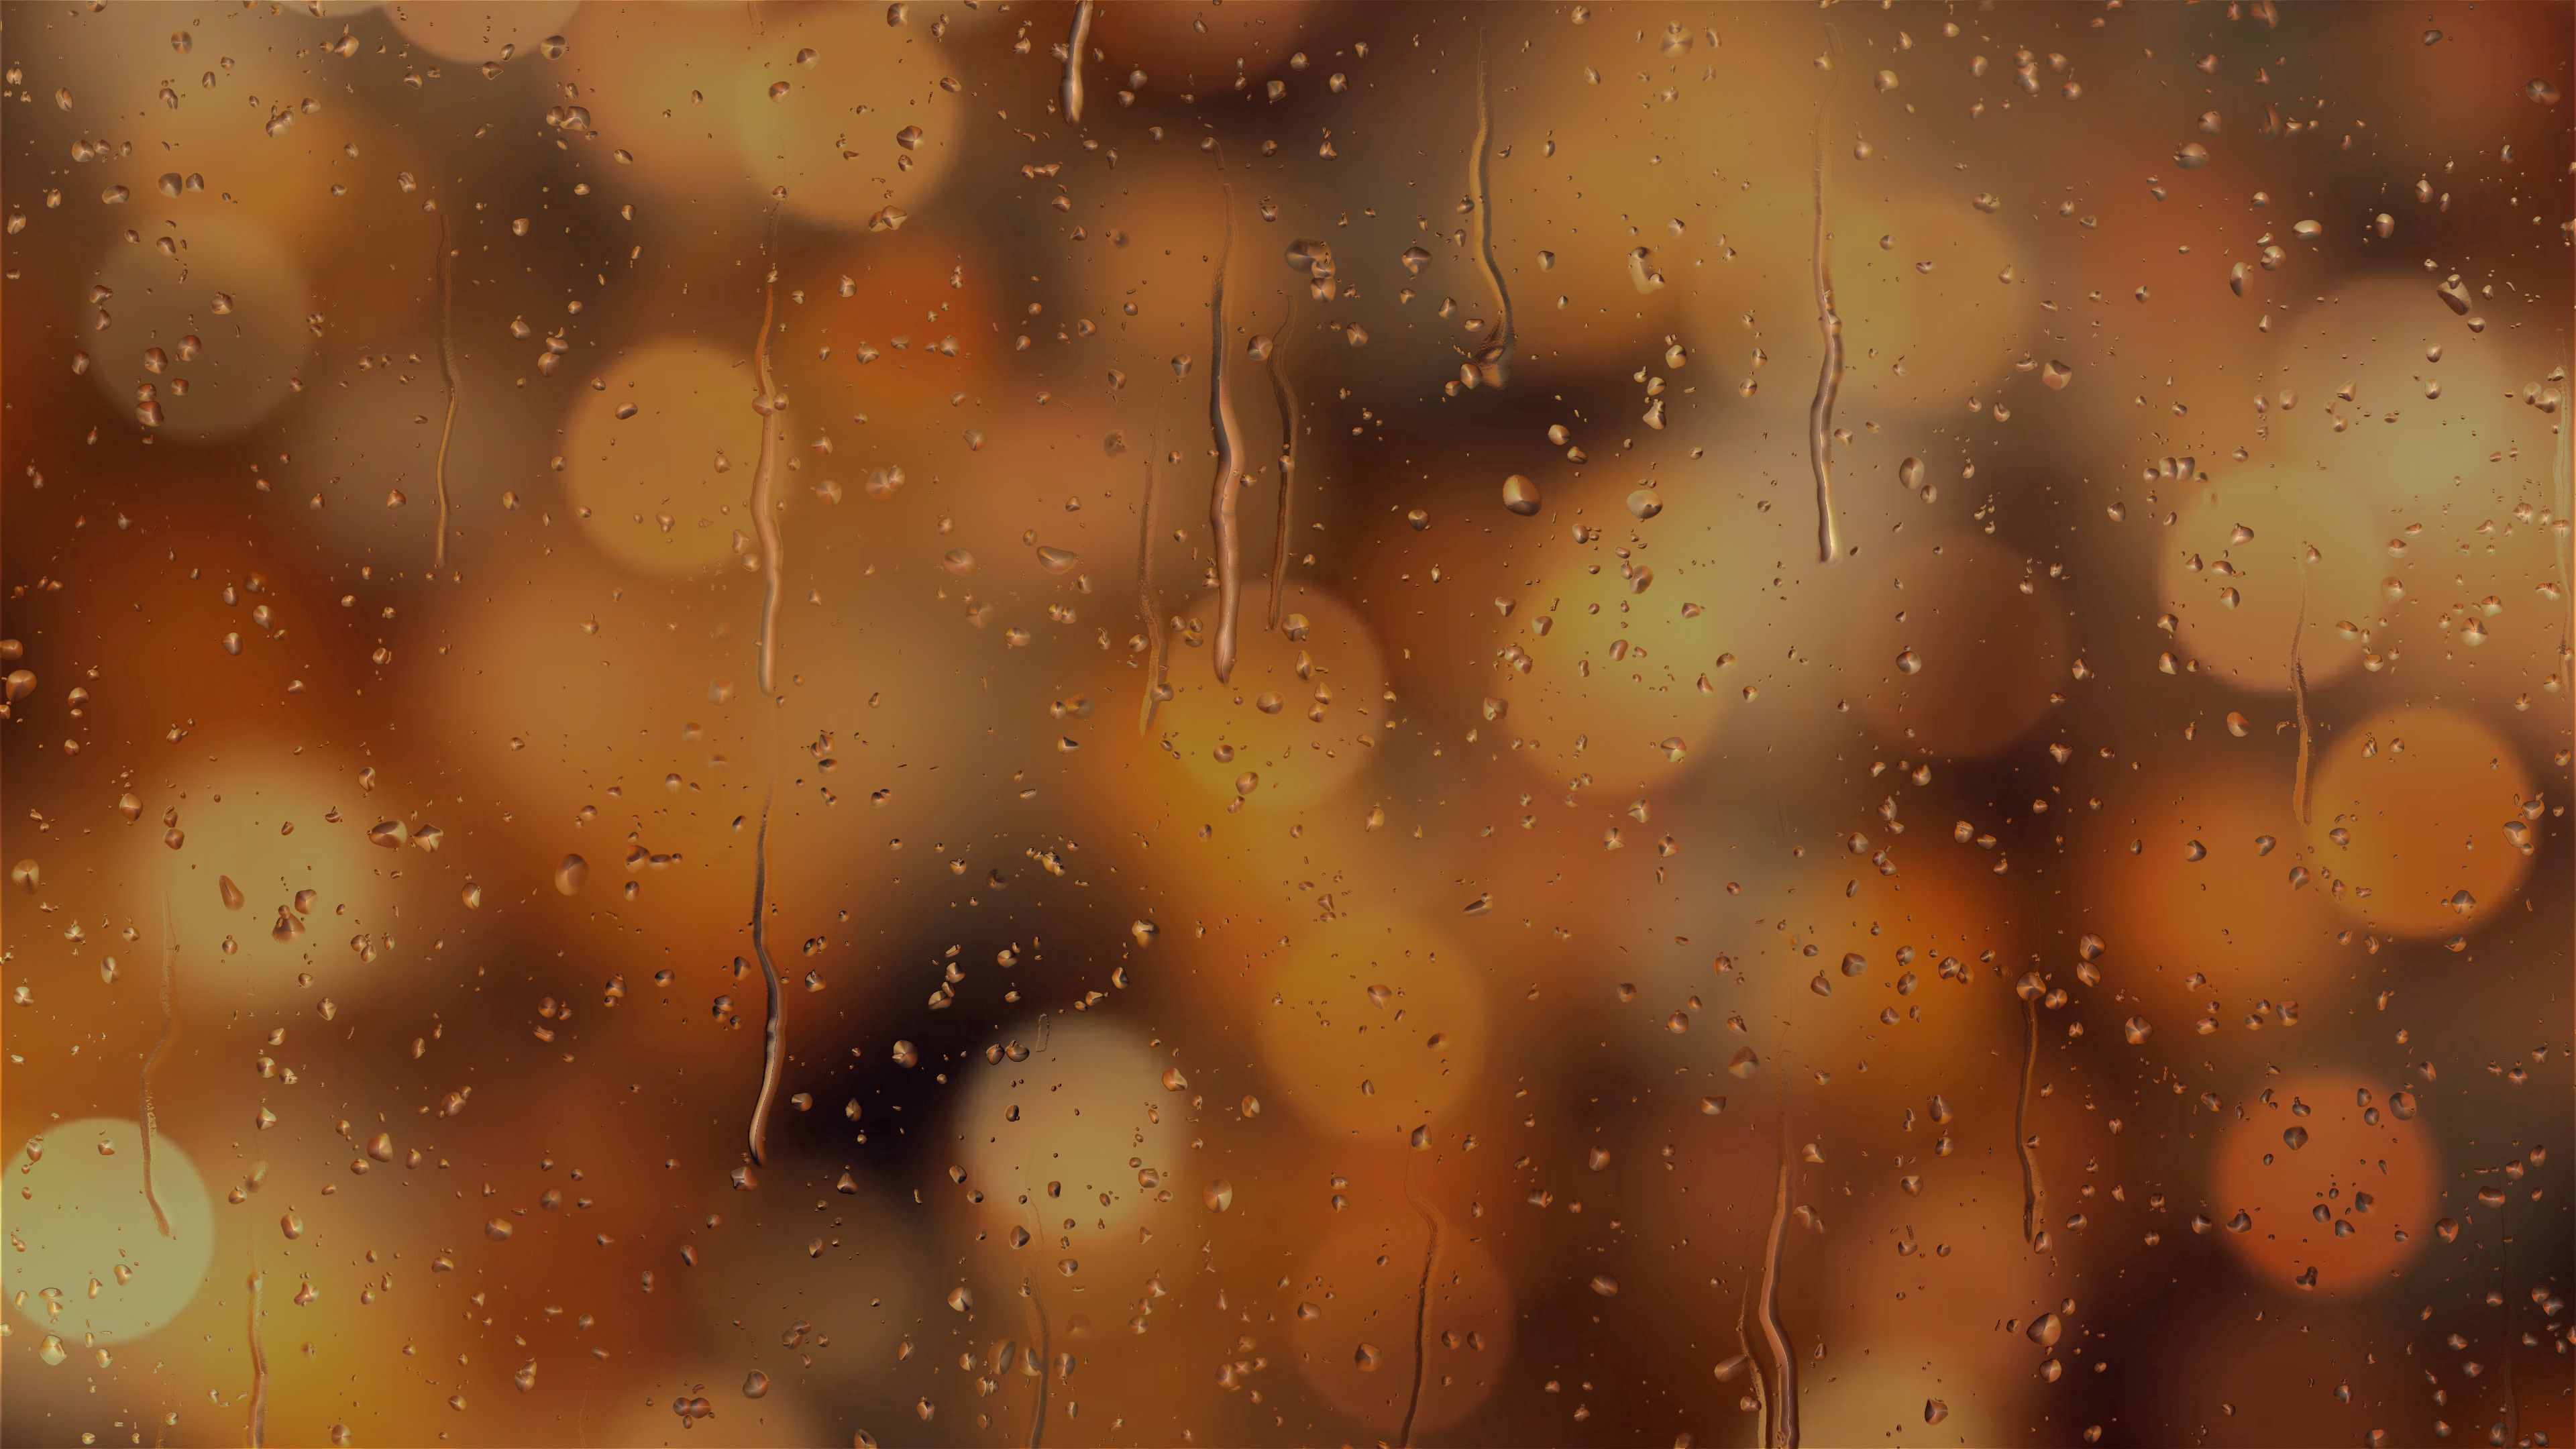 103963 download wallpaper surface, glare, macro, drops, glass screensavers and pictures for free